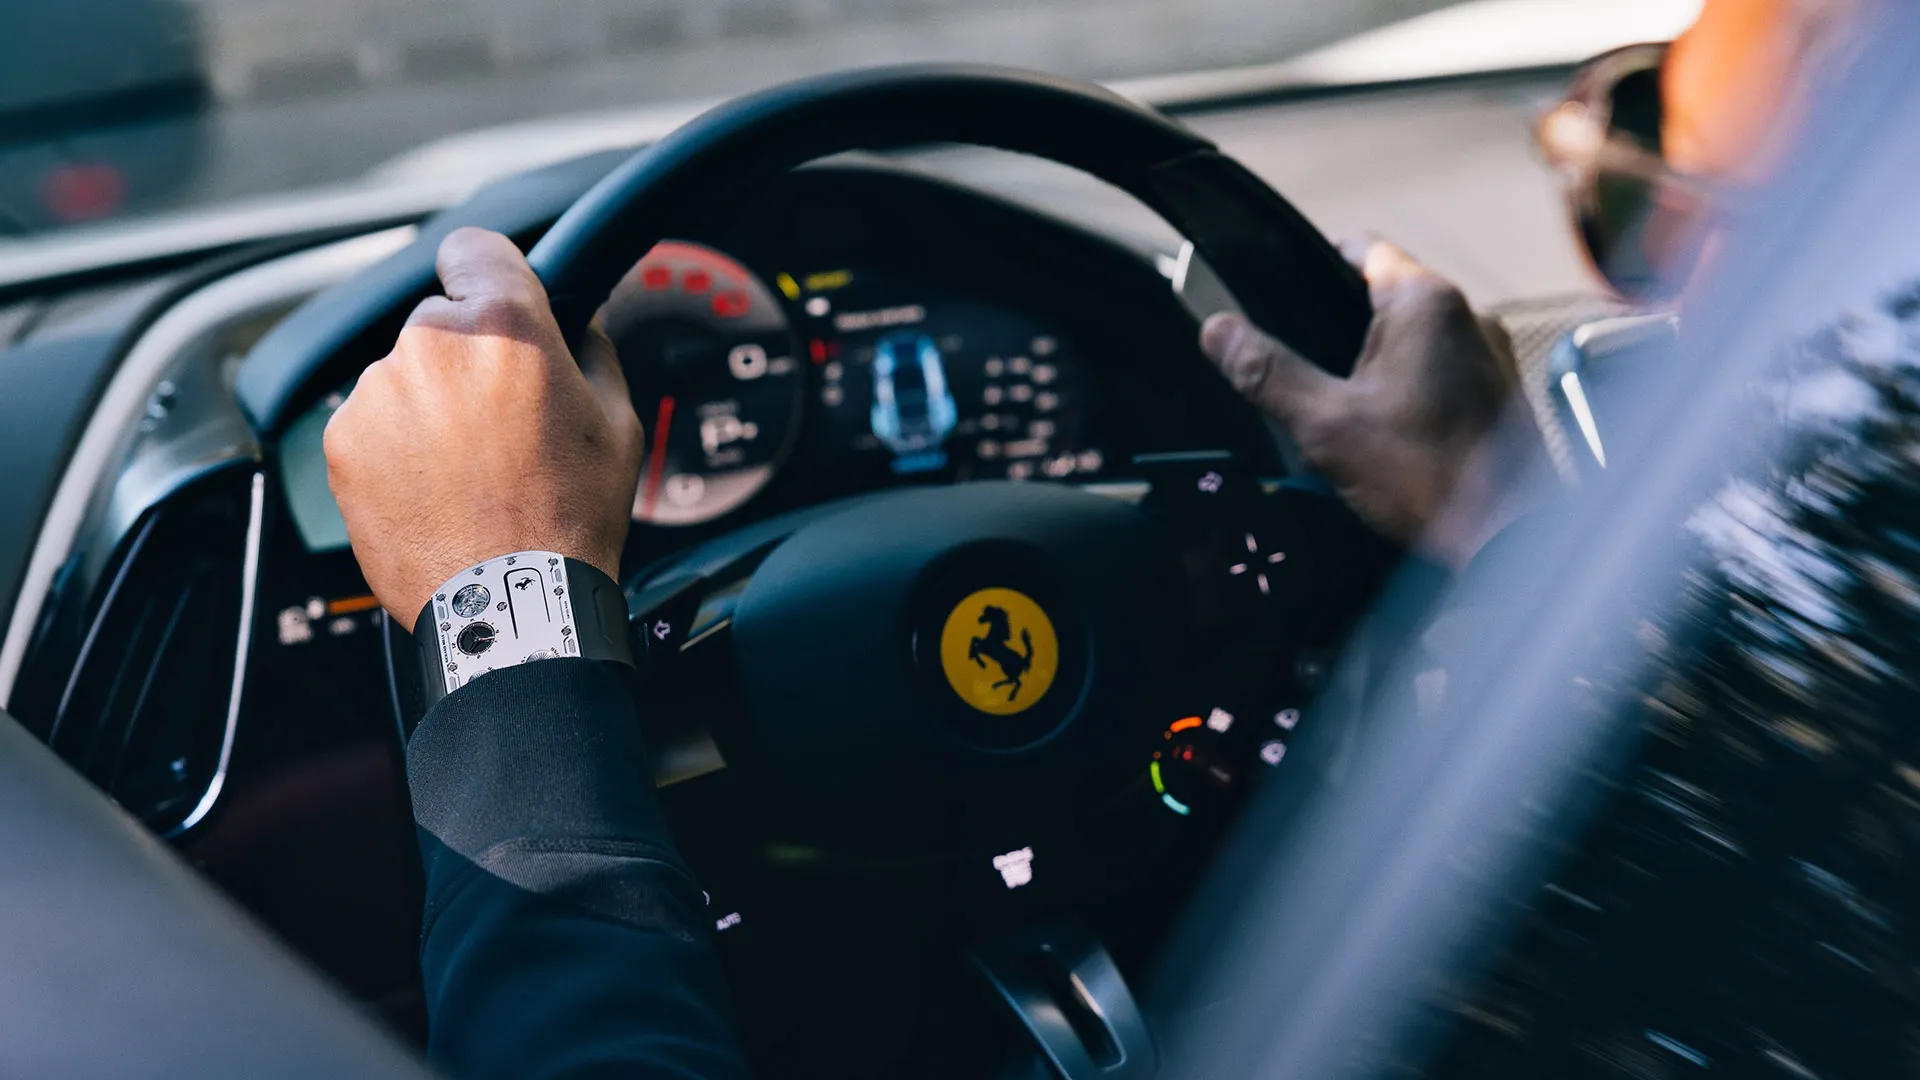 The Richard Mille UP-01 Watch in Collaboration with Ferrari